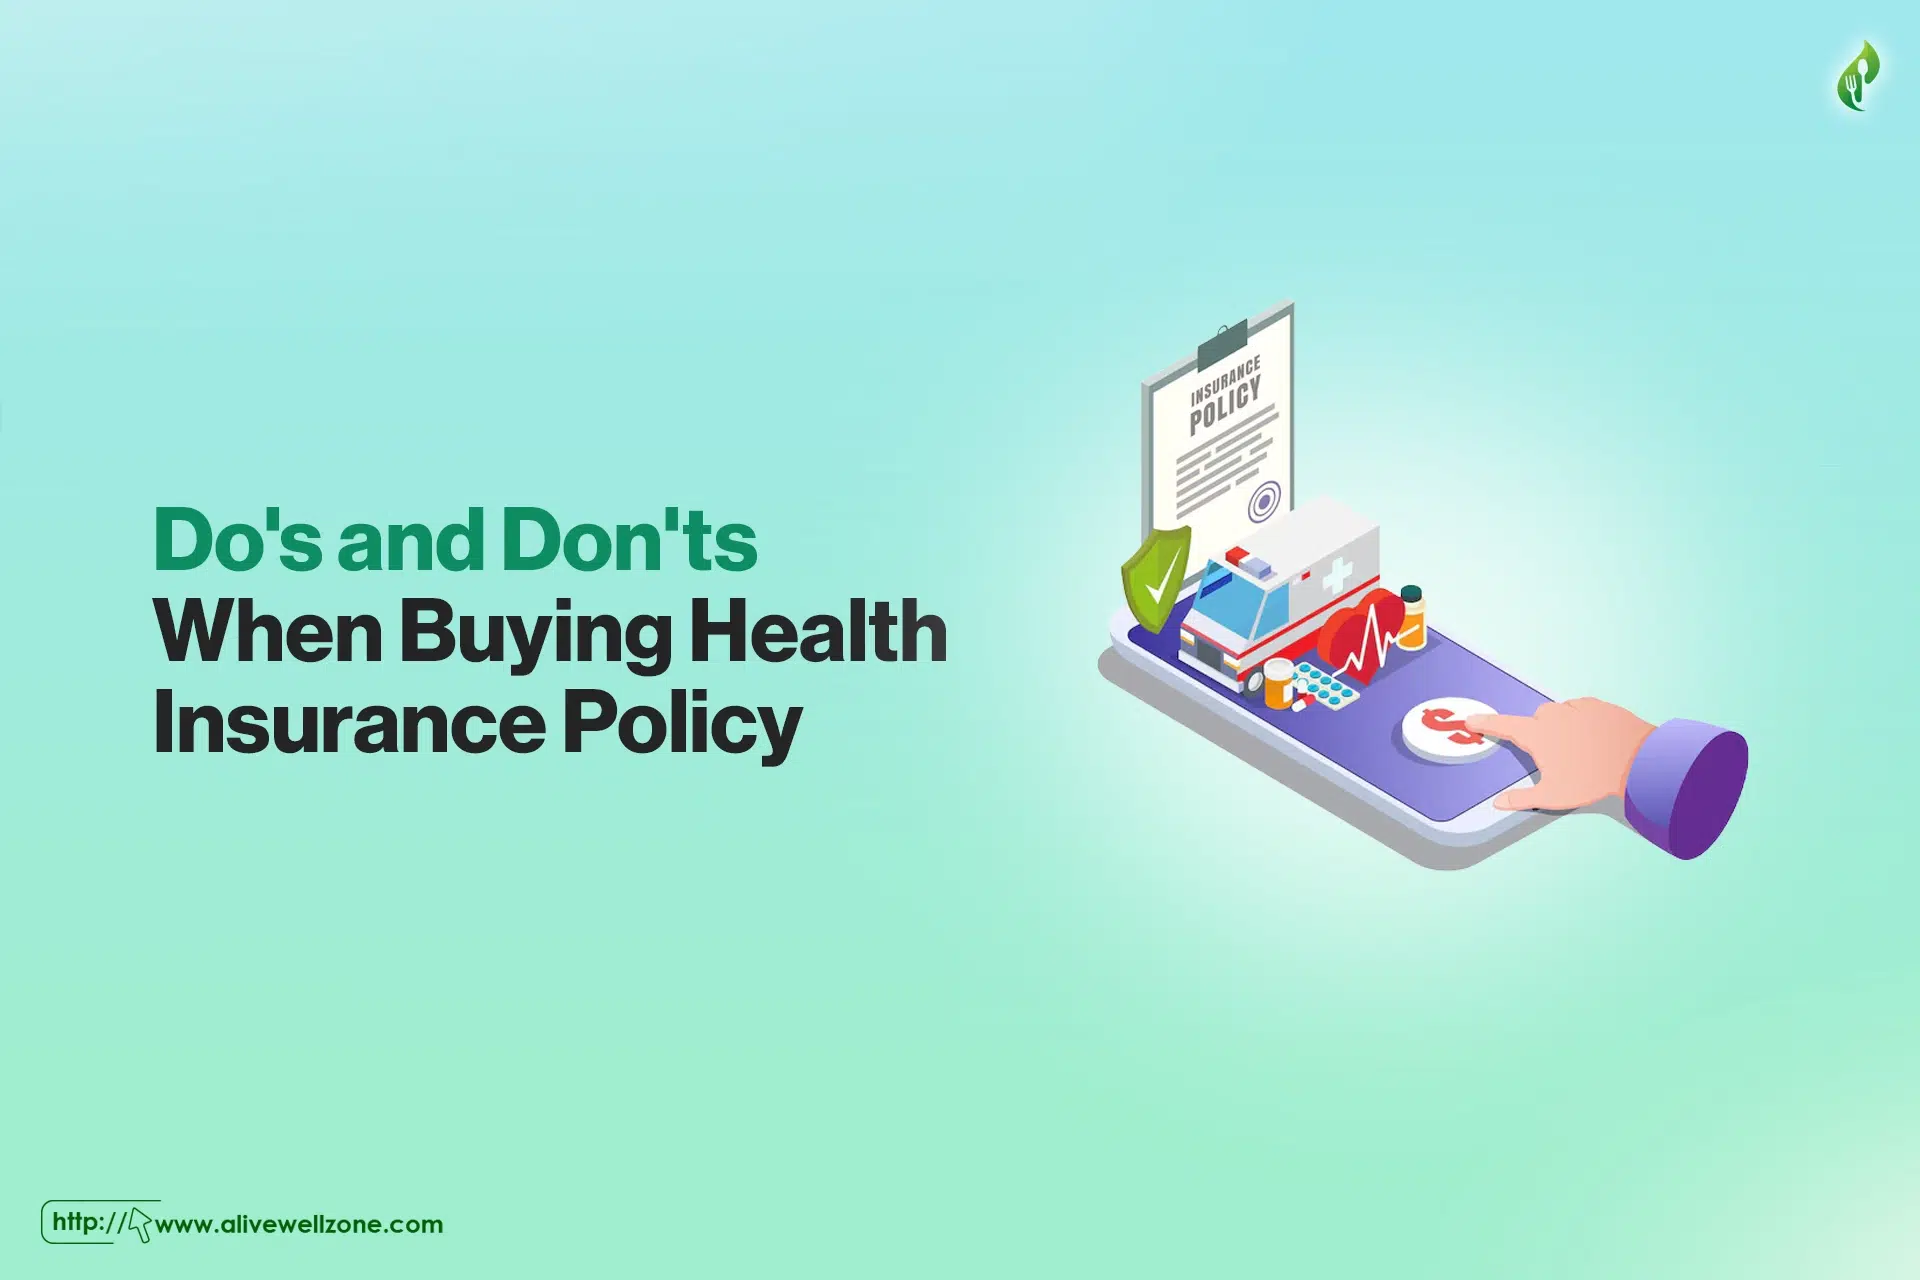 do's and don'ts when buying health insurance policy